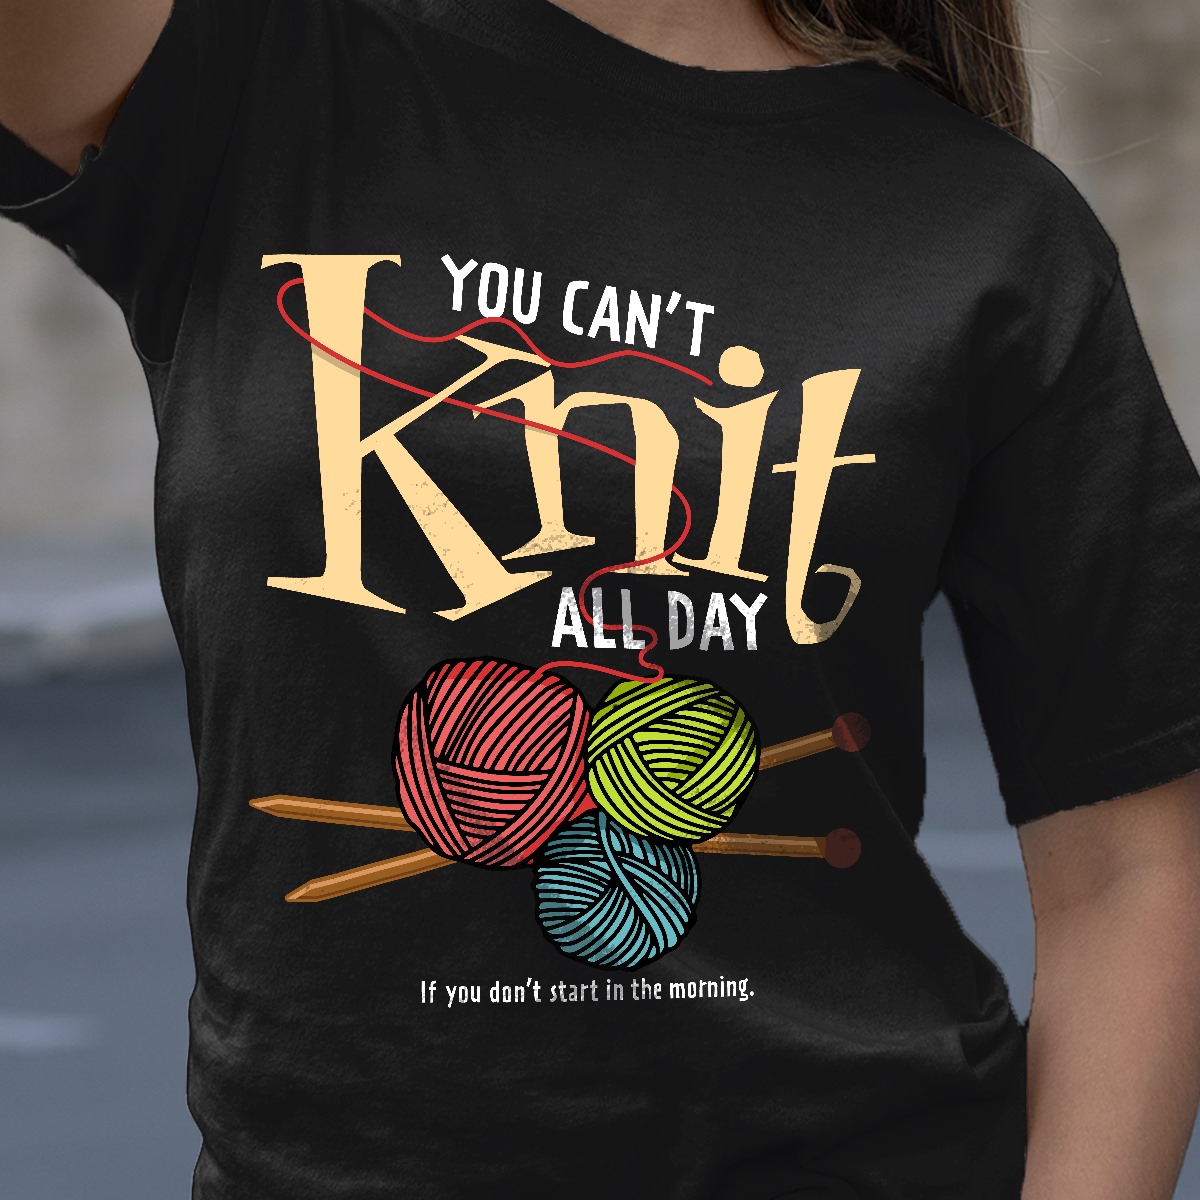 You can't knit all day If you don't start in the morning